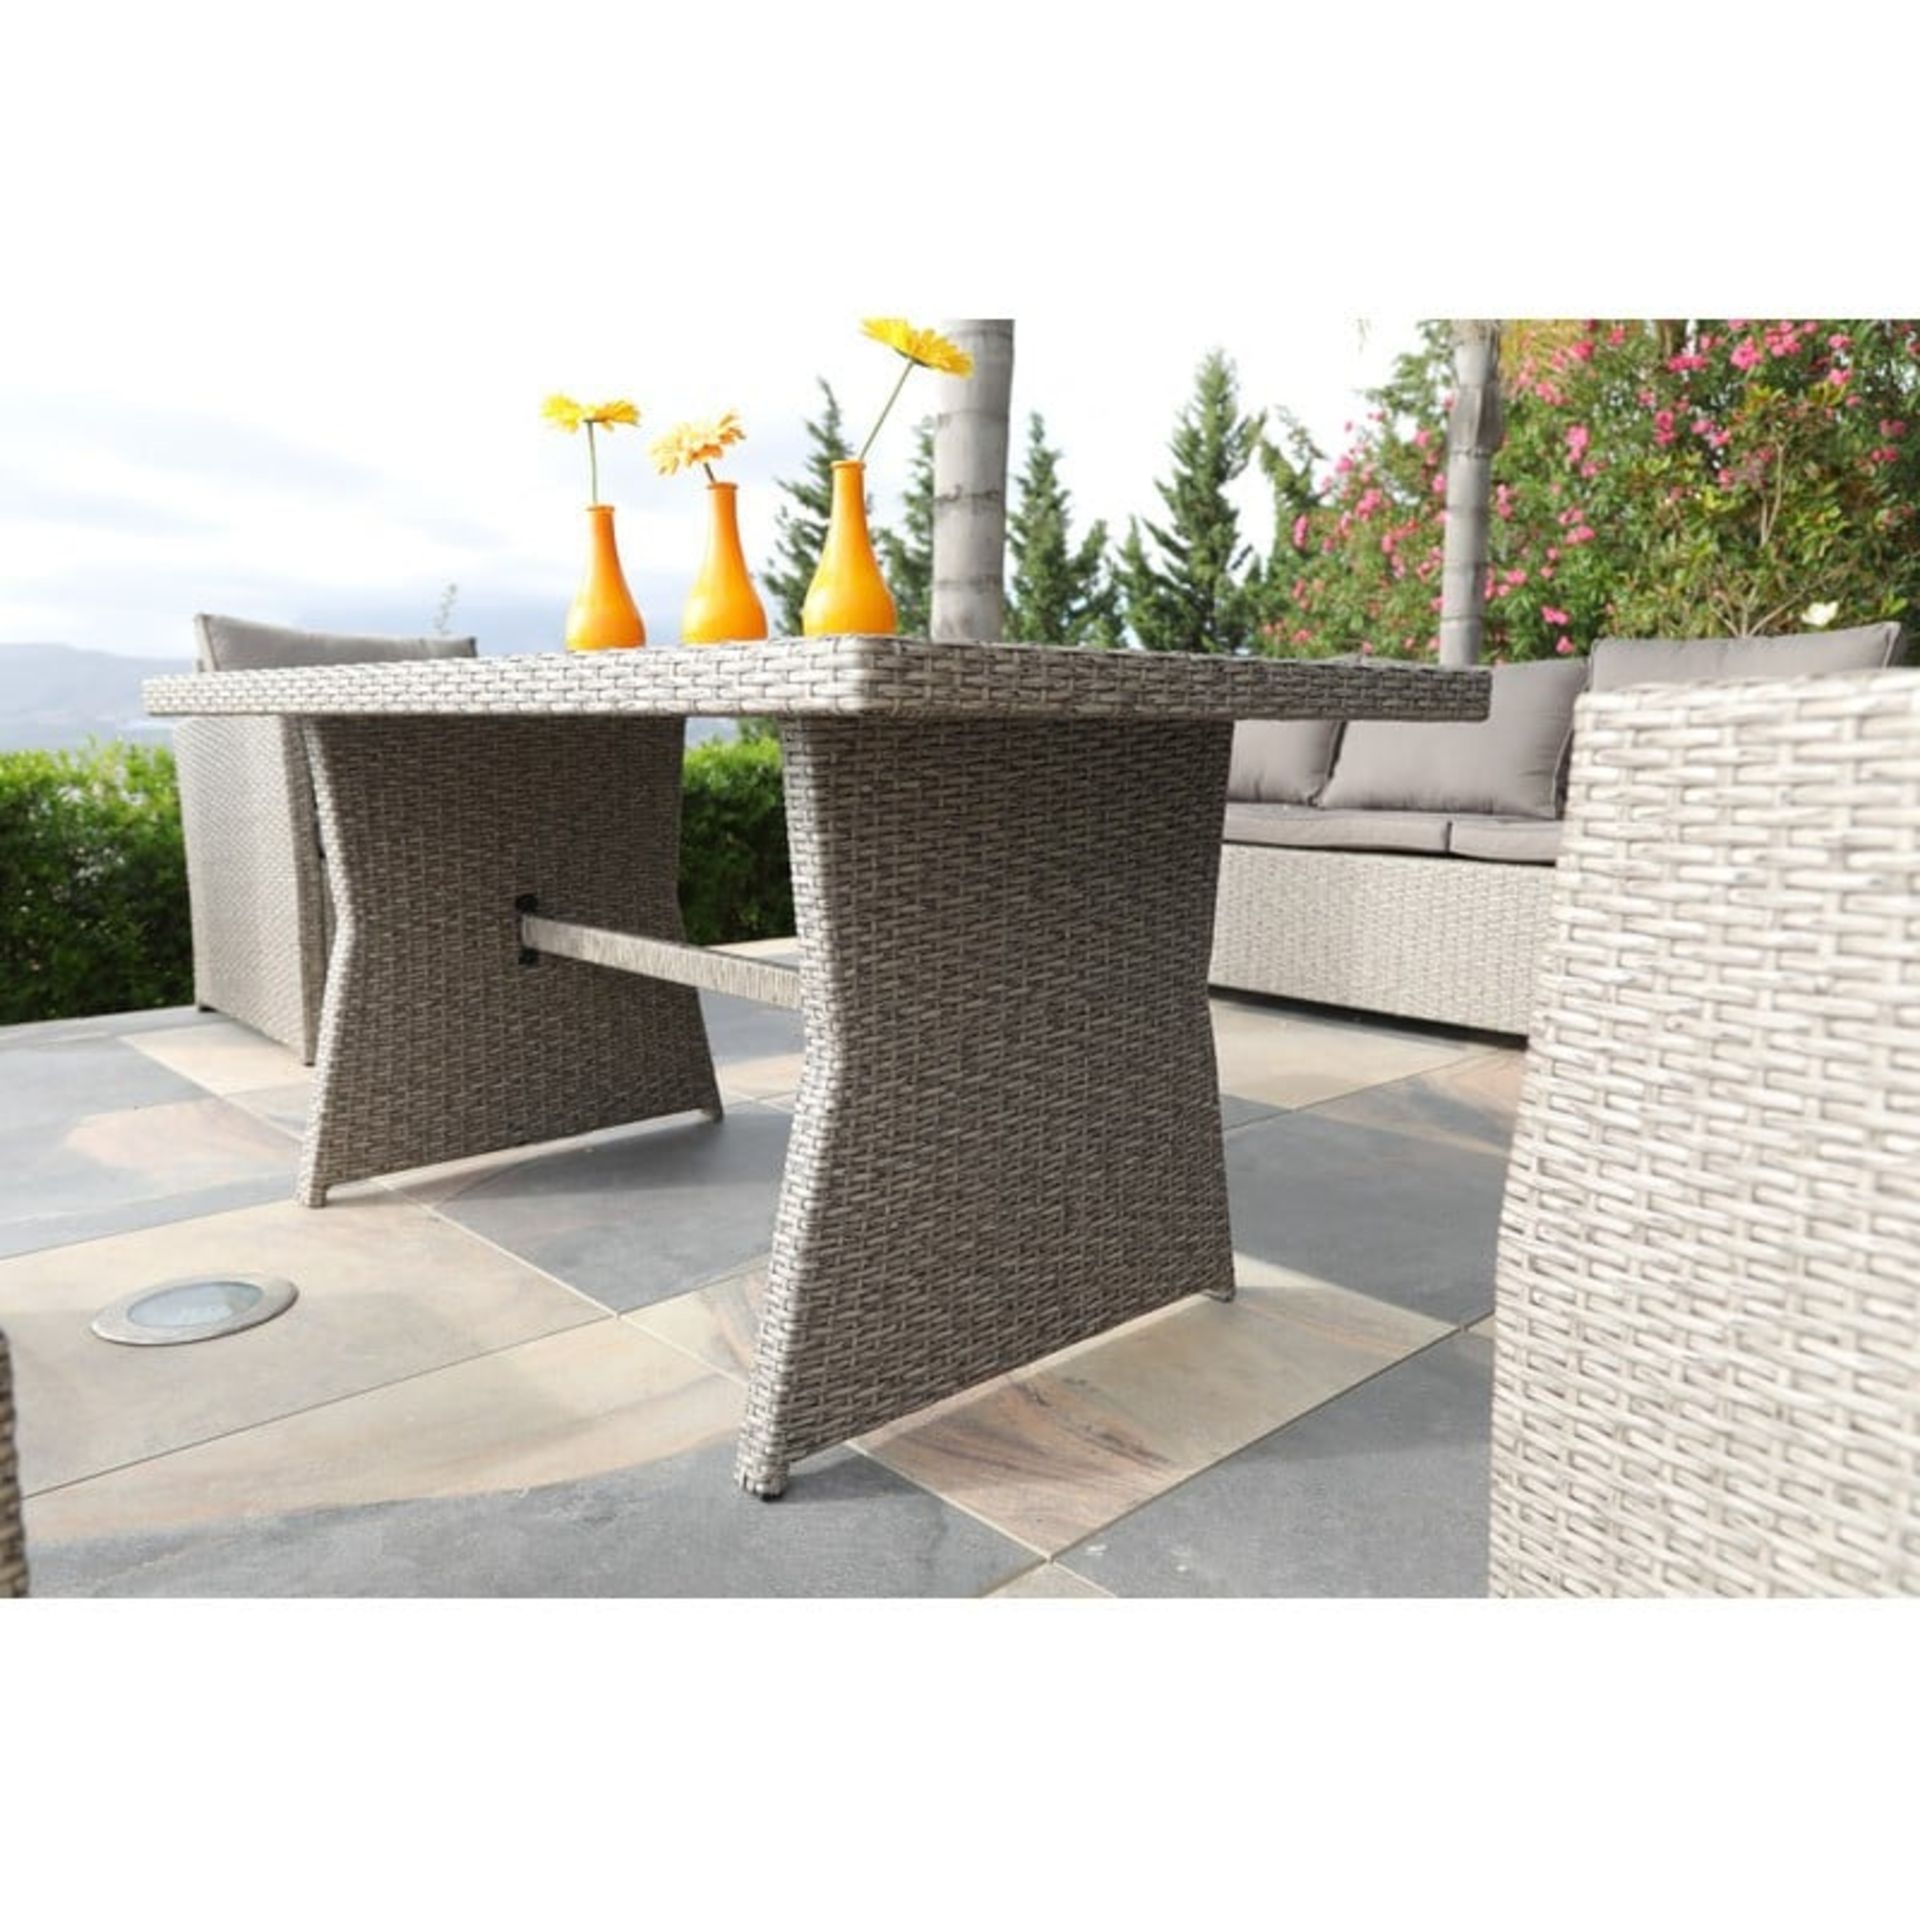 * 1 xBrand New - In Cardboard Boxes - Garden Rattan Furntiure Set. Brown wicker with Brown Cushions. - Image 2 of 11